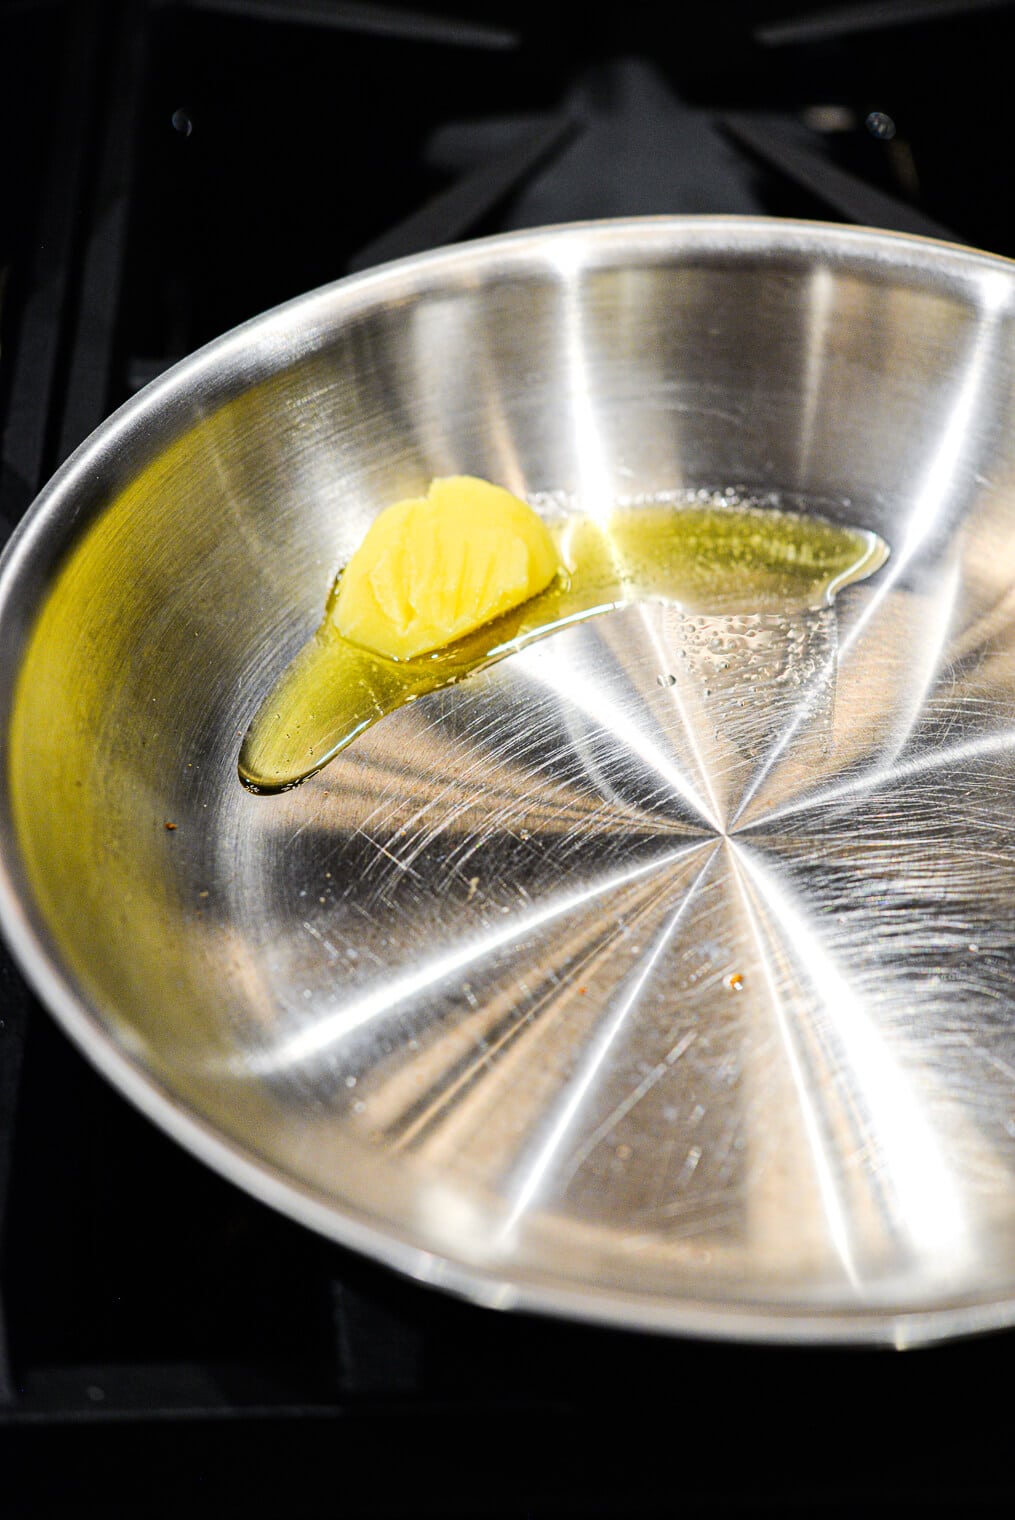 Butter melting in stainless steel pan